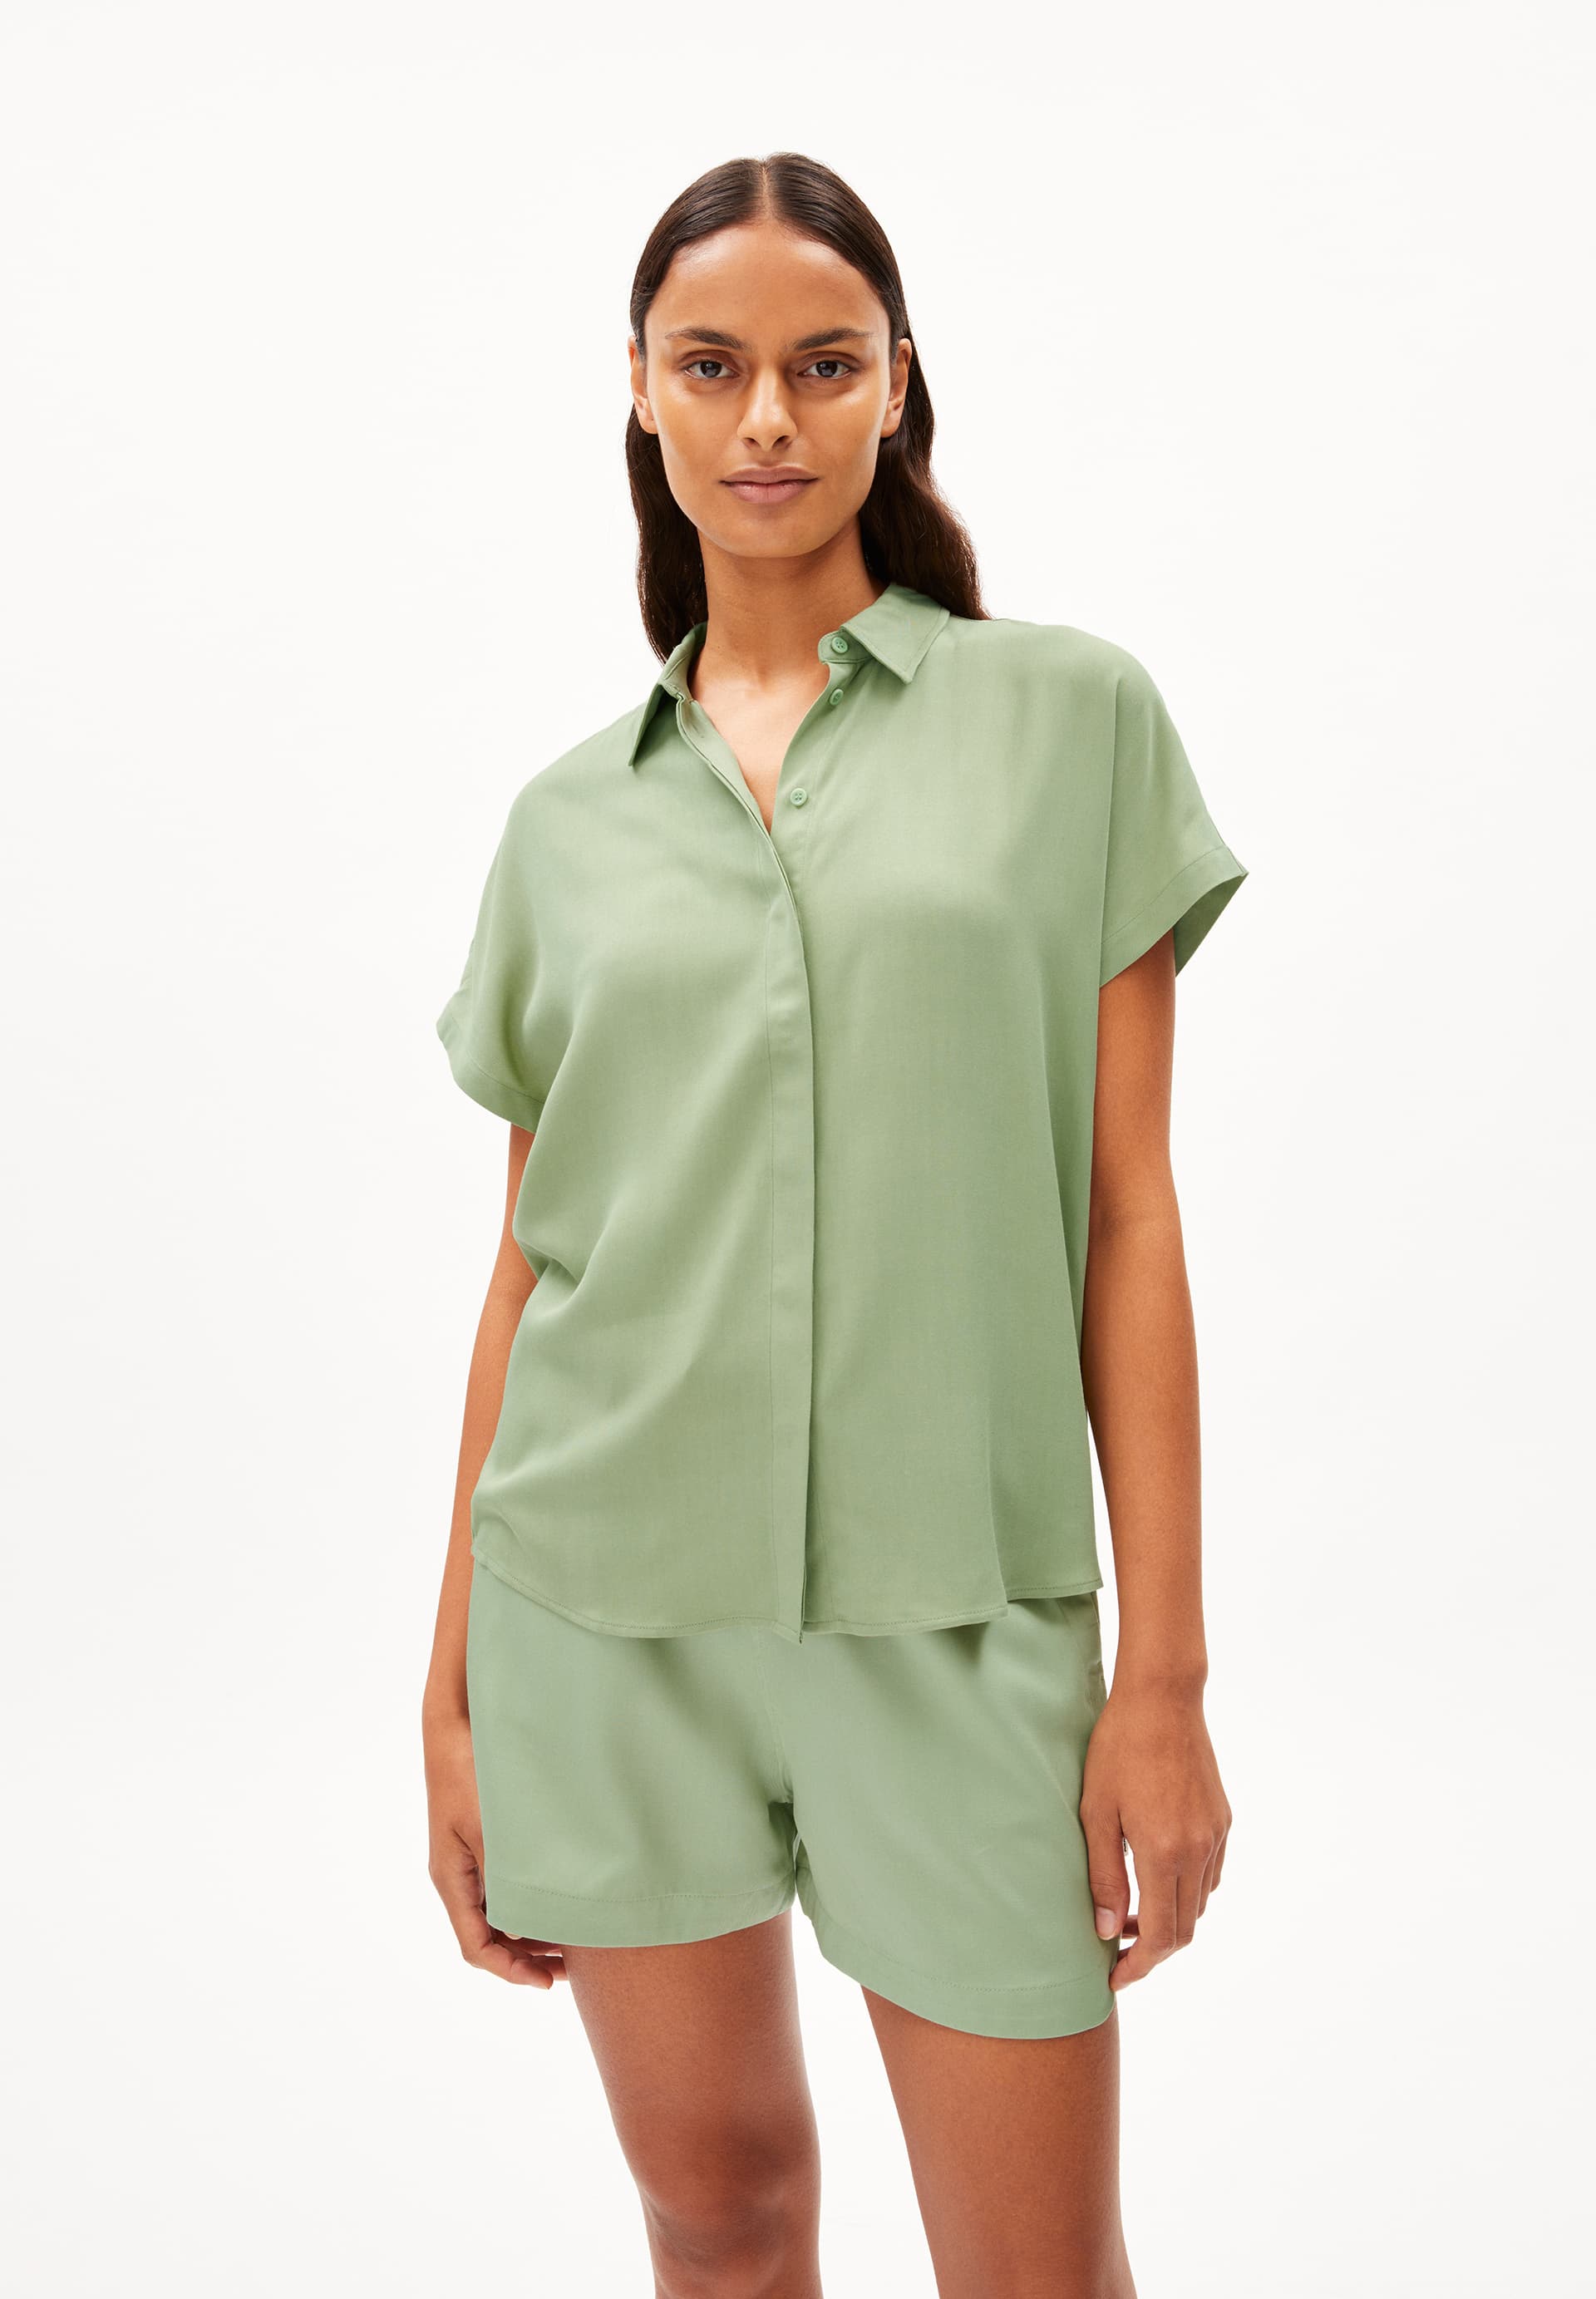 LARISAANA Blouse Relaxed Fit made of LENZING™ ECOVERO™ Viscose